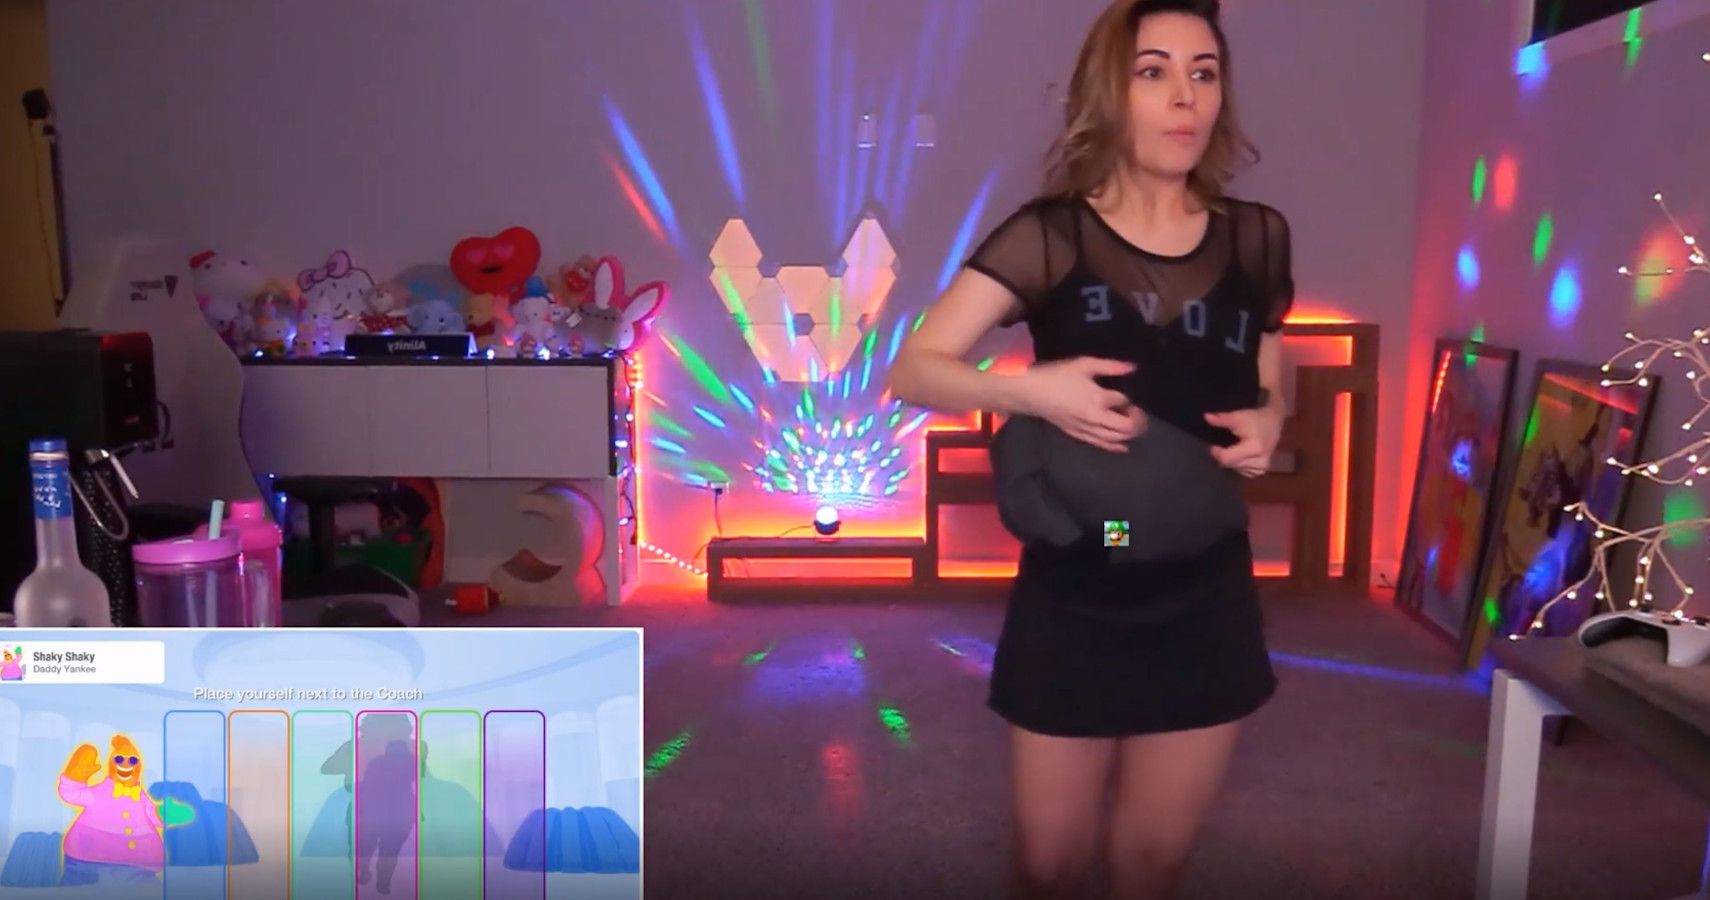 brian windover recommends alinity twitch fail dress pic